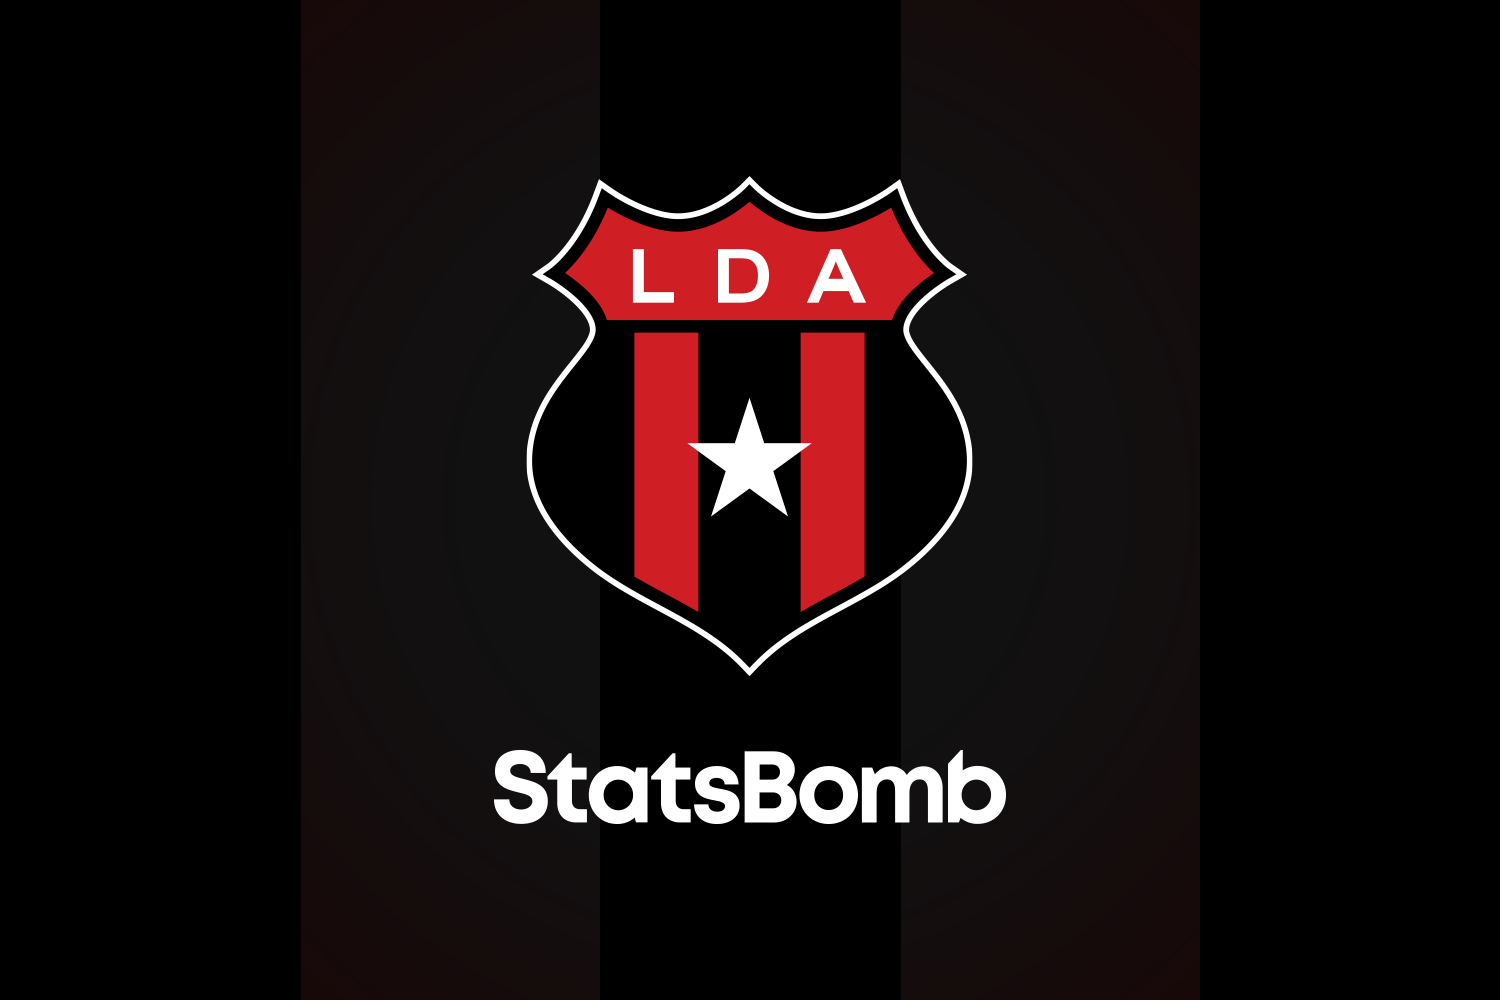 StatsBomb Continues LATAM Growth with LD Alajuelense Agreement